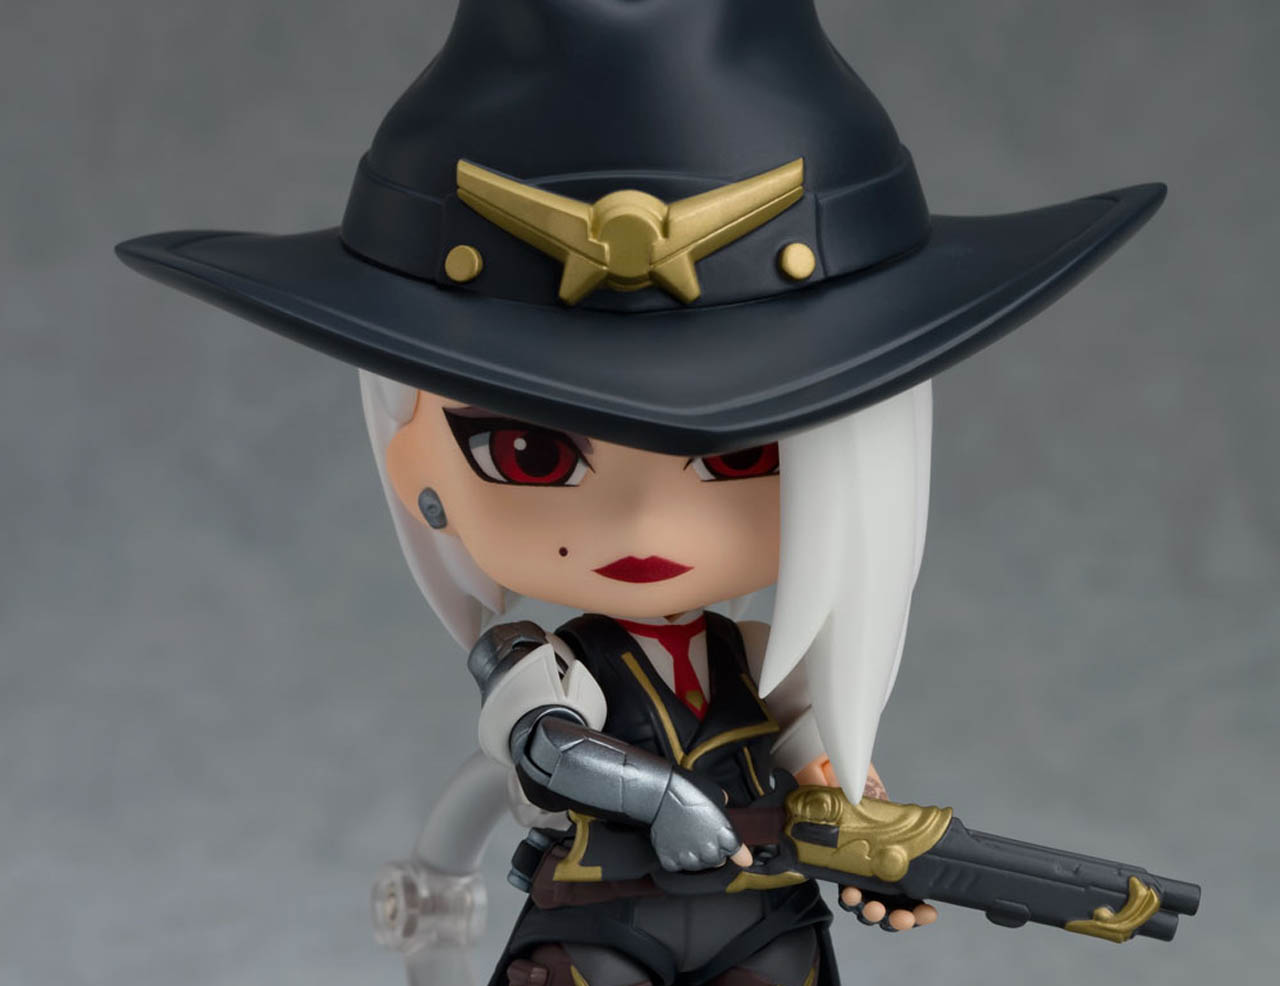 Nendroid Ashe - Blizzard Overwatch Good Smile Company